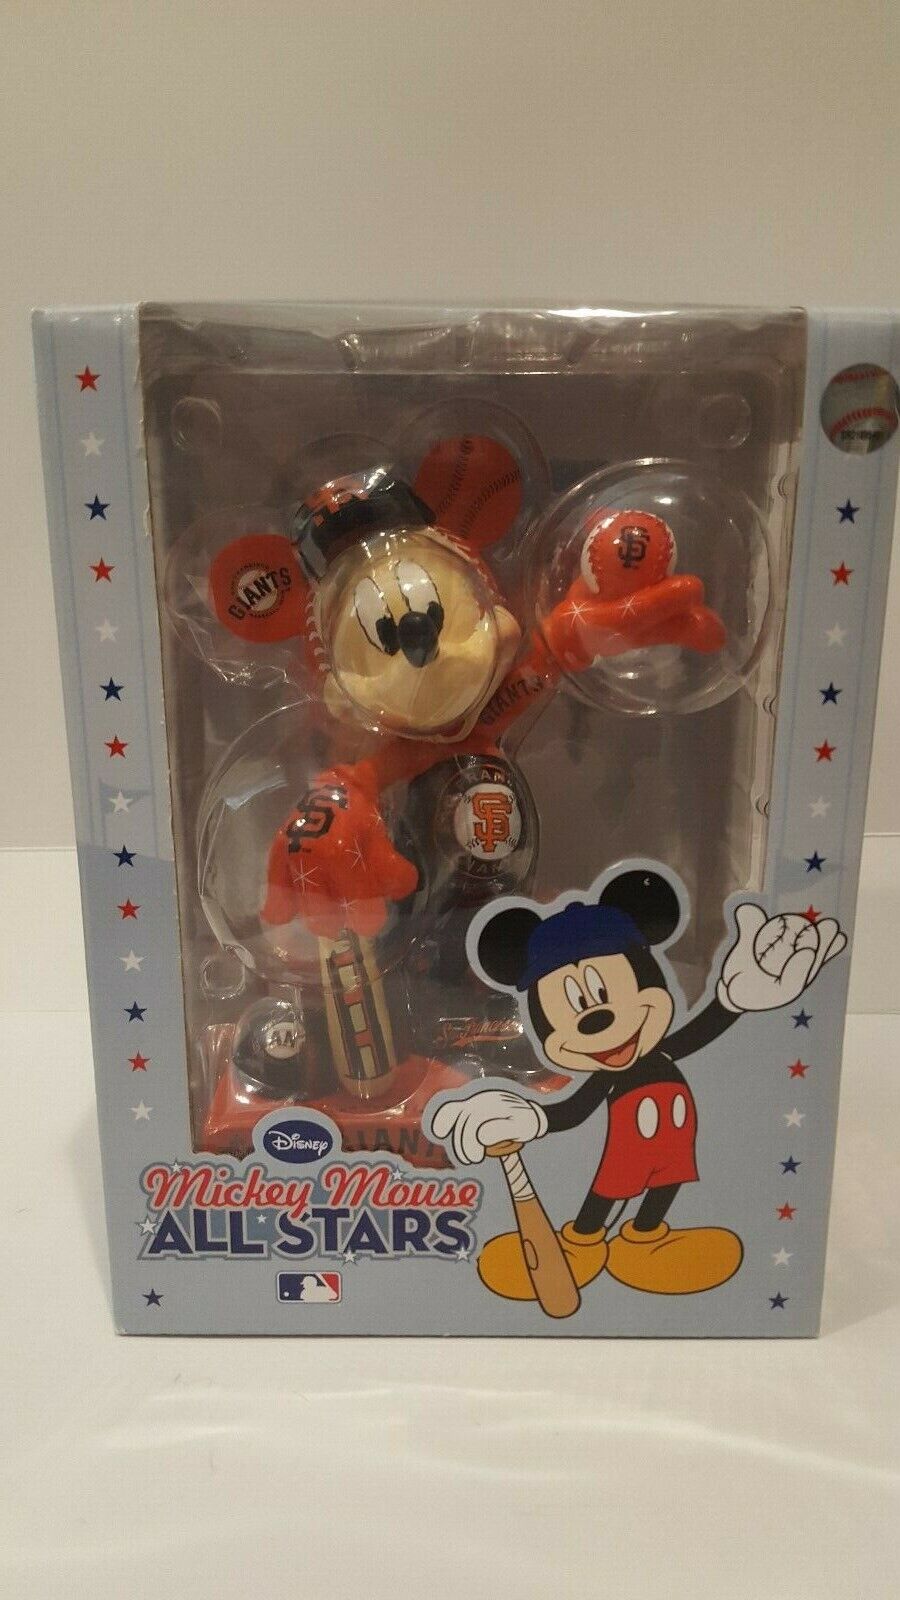 2010 DISNEY MICKEY MOUSE MLB SF GIANTS WS CHAMPS ALL STAR FIGURINE RARE NEW